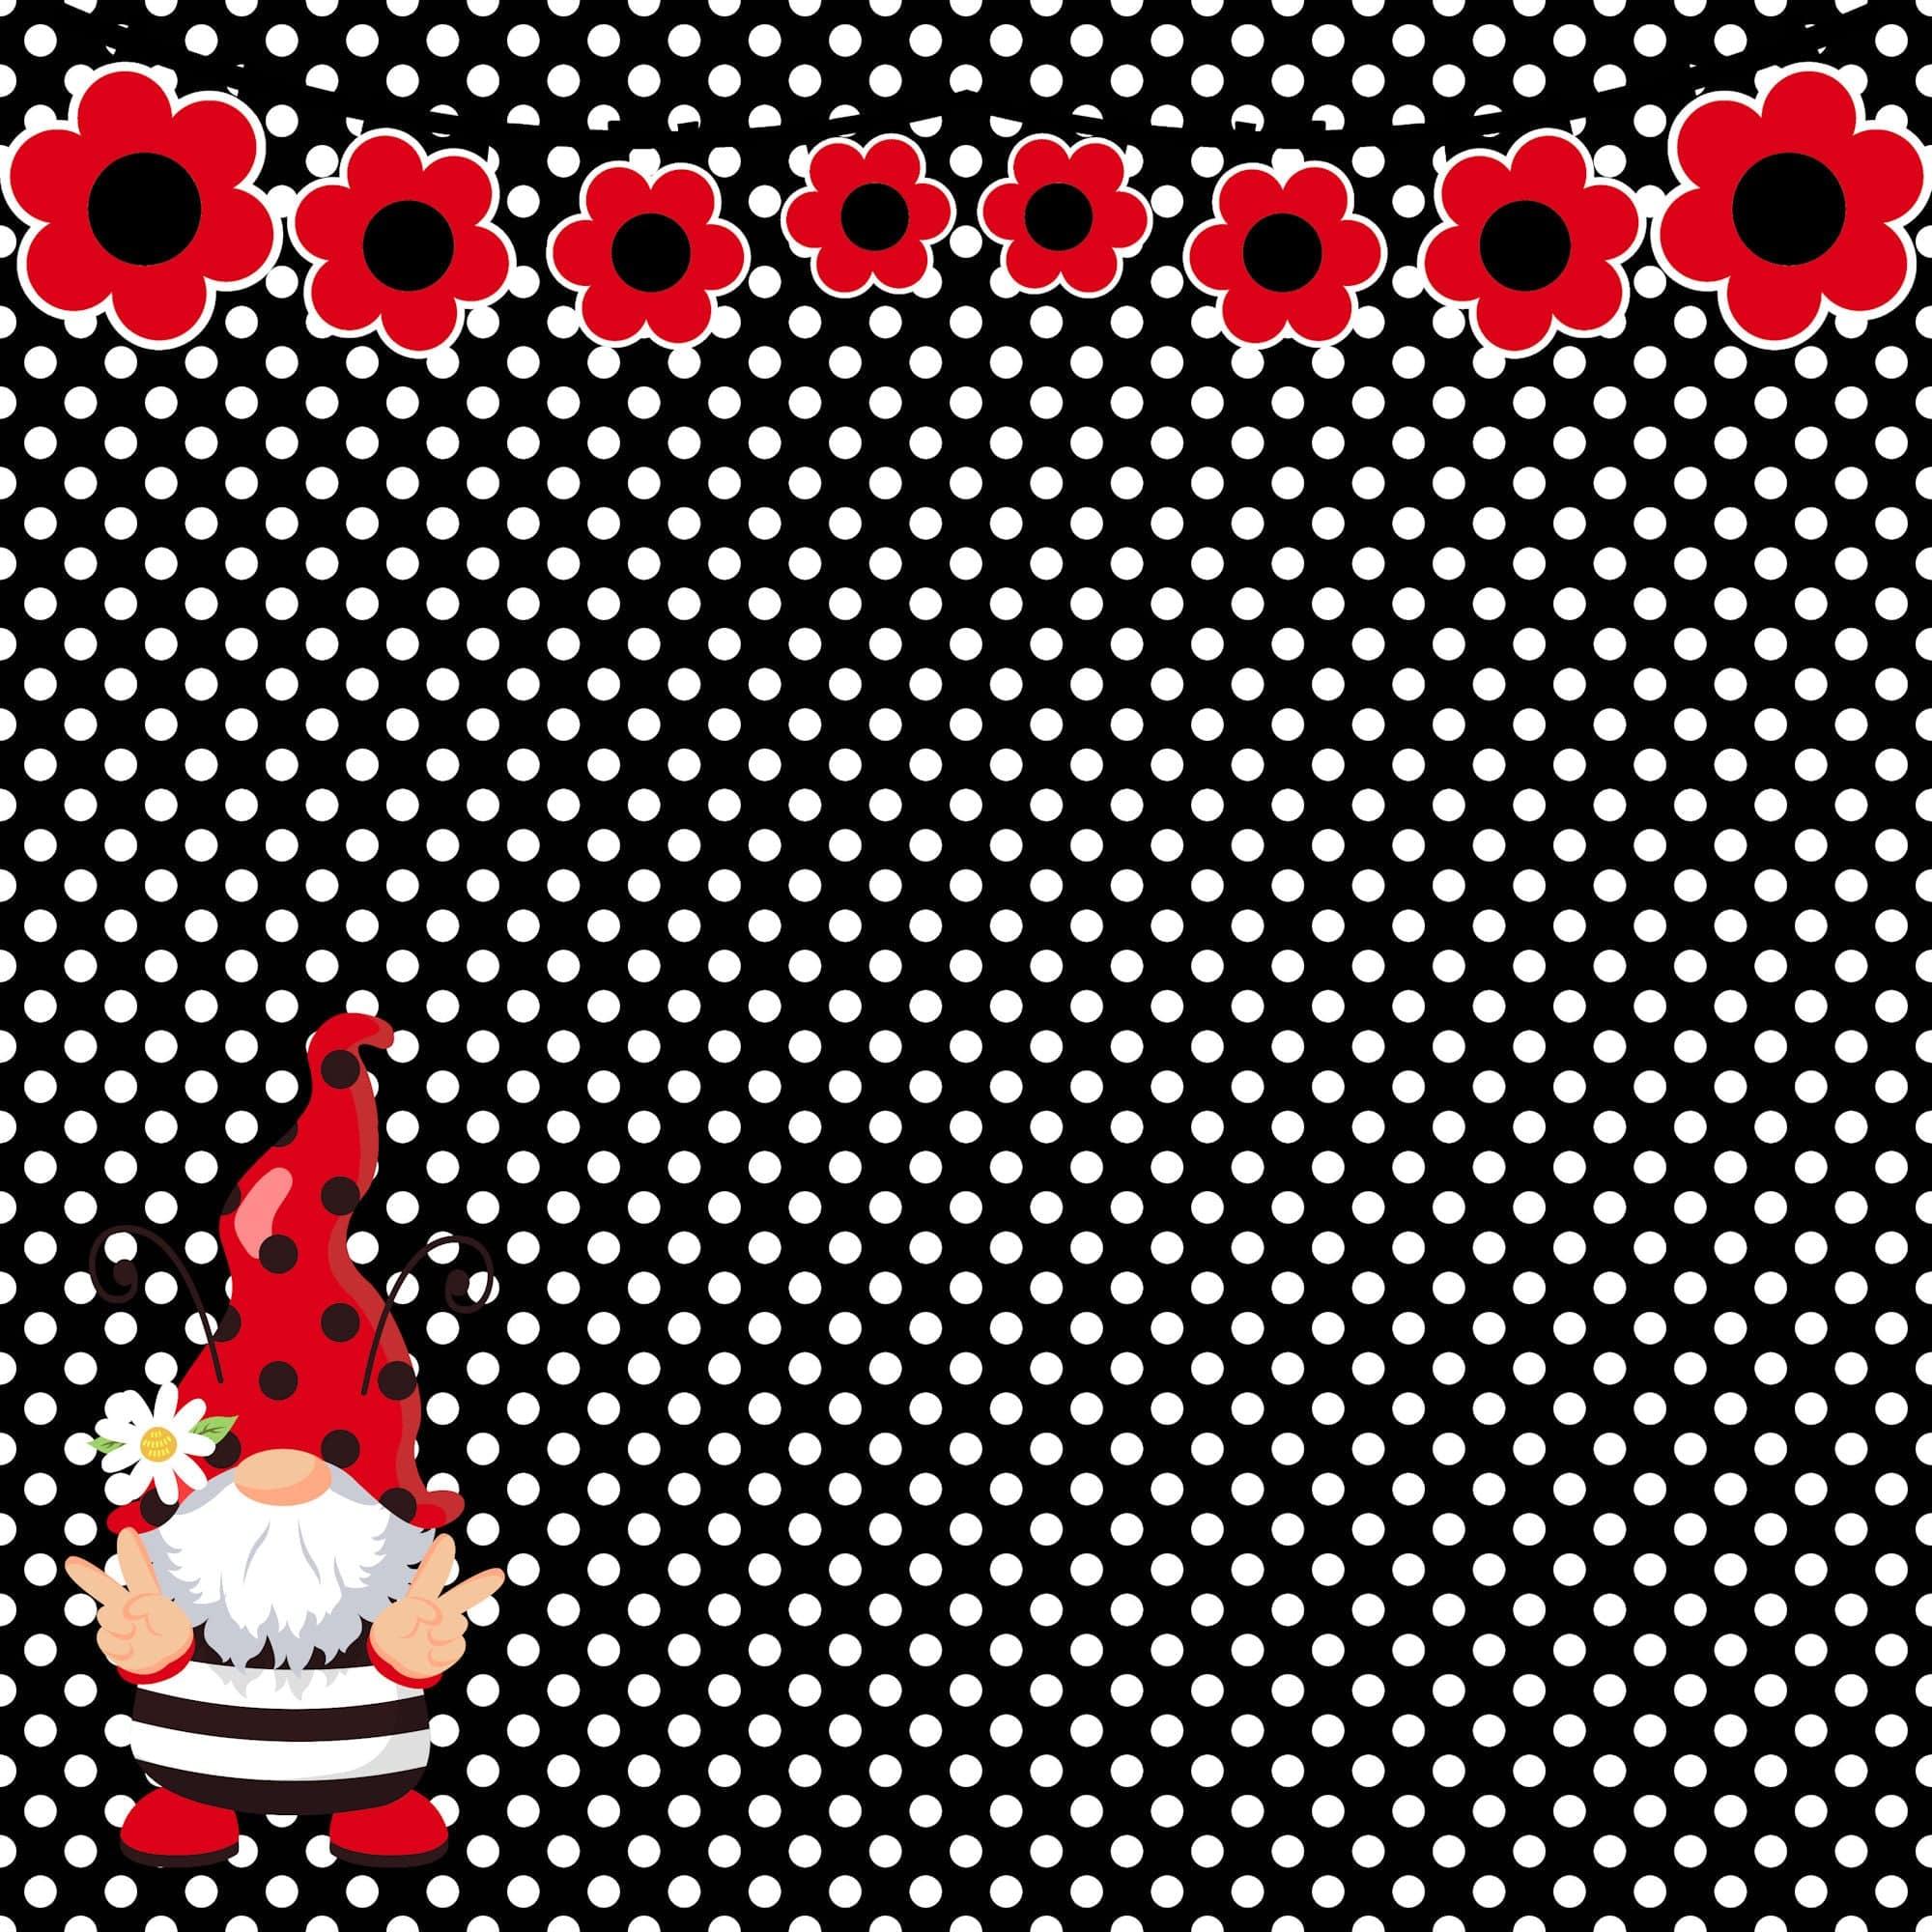 Ladybug Love Collection Peace Out 12 x 12 Double-Sided Scrapbook Paper by SSC Designs